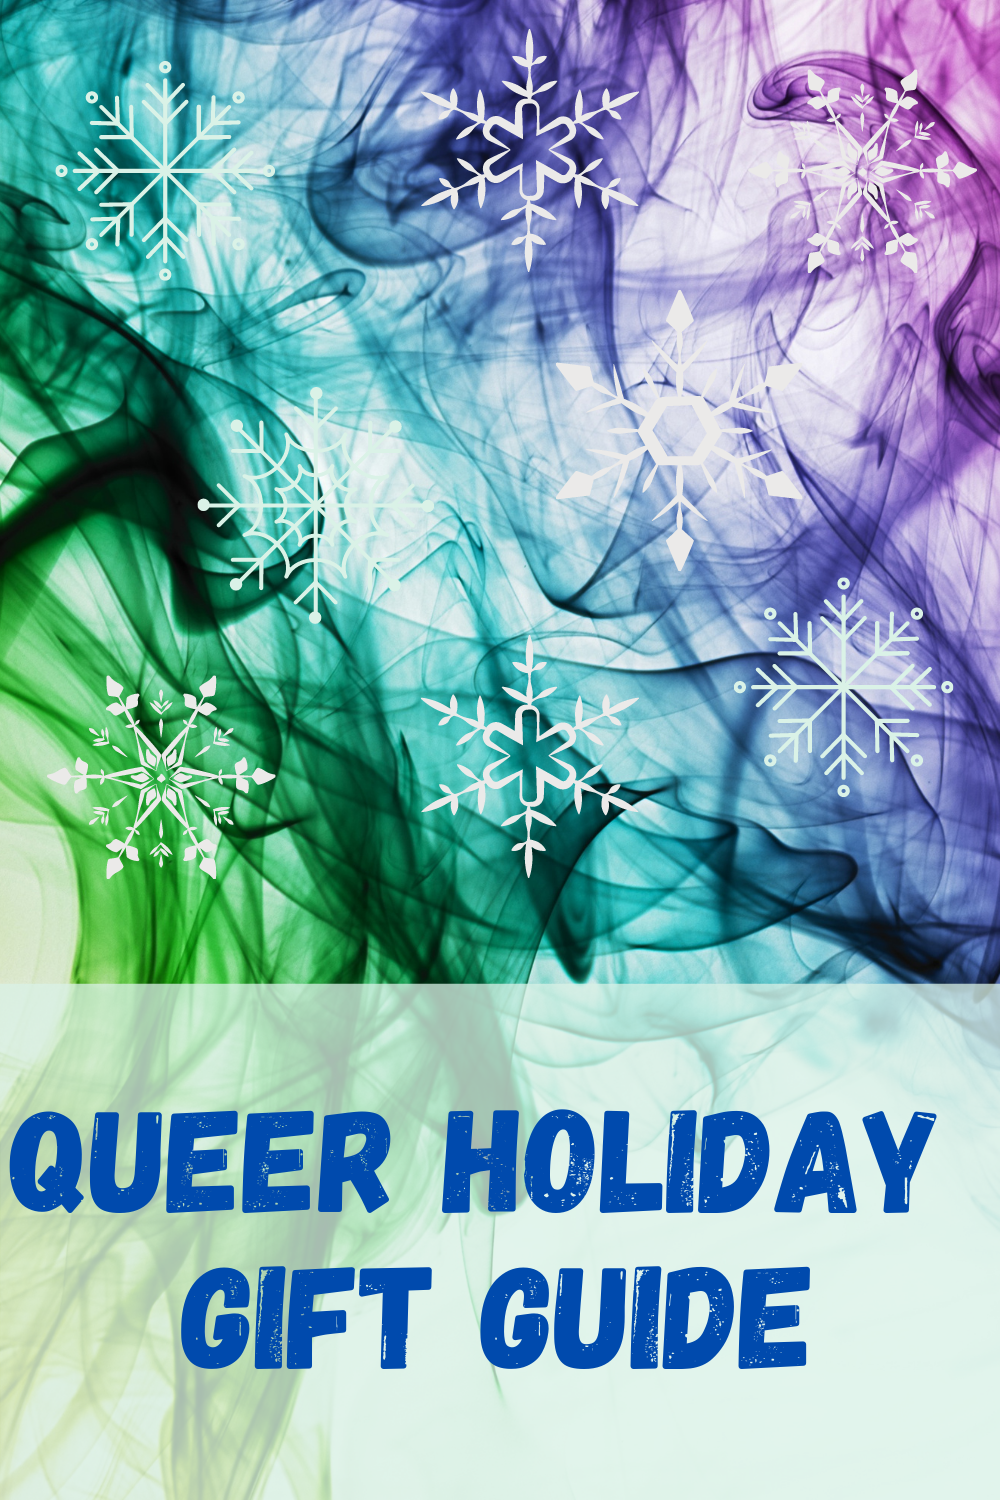 Queer holiday gift guide pinterest